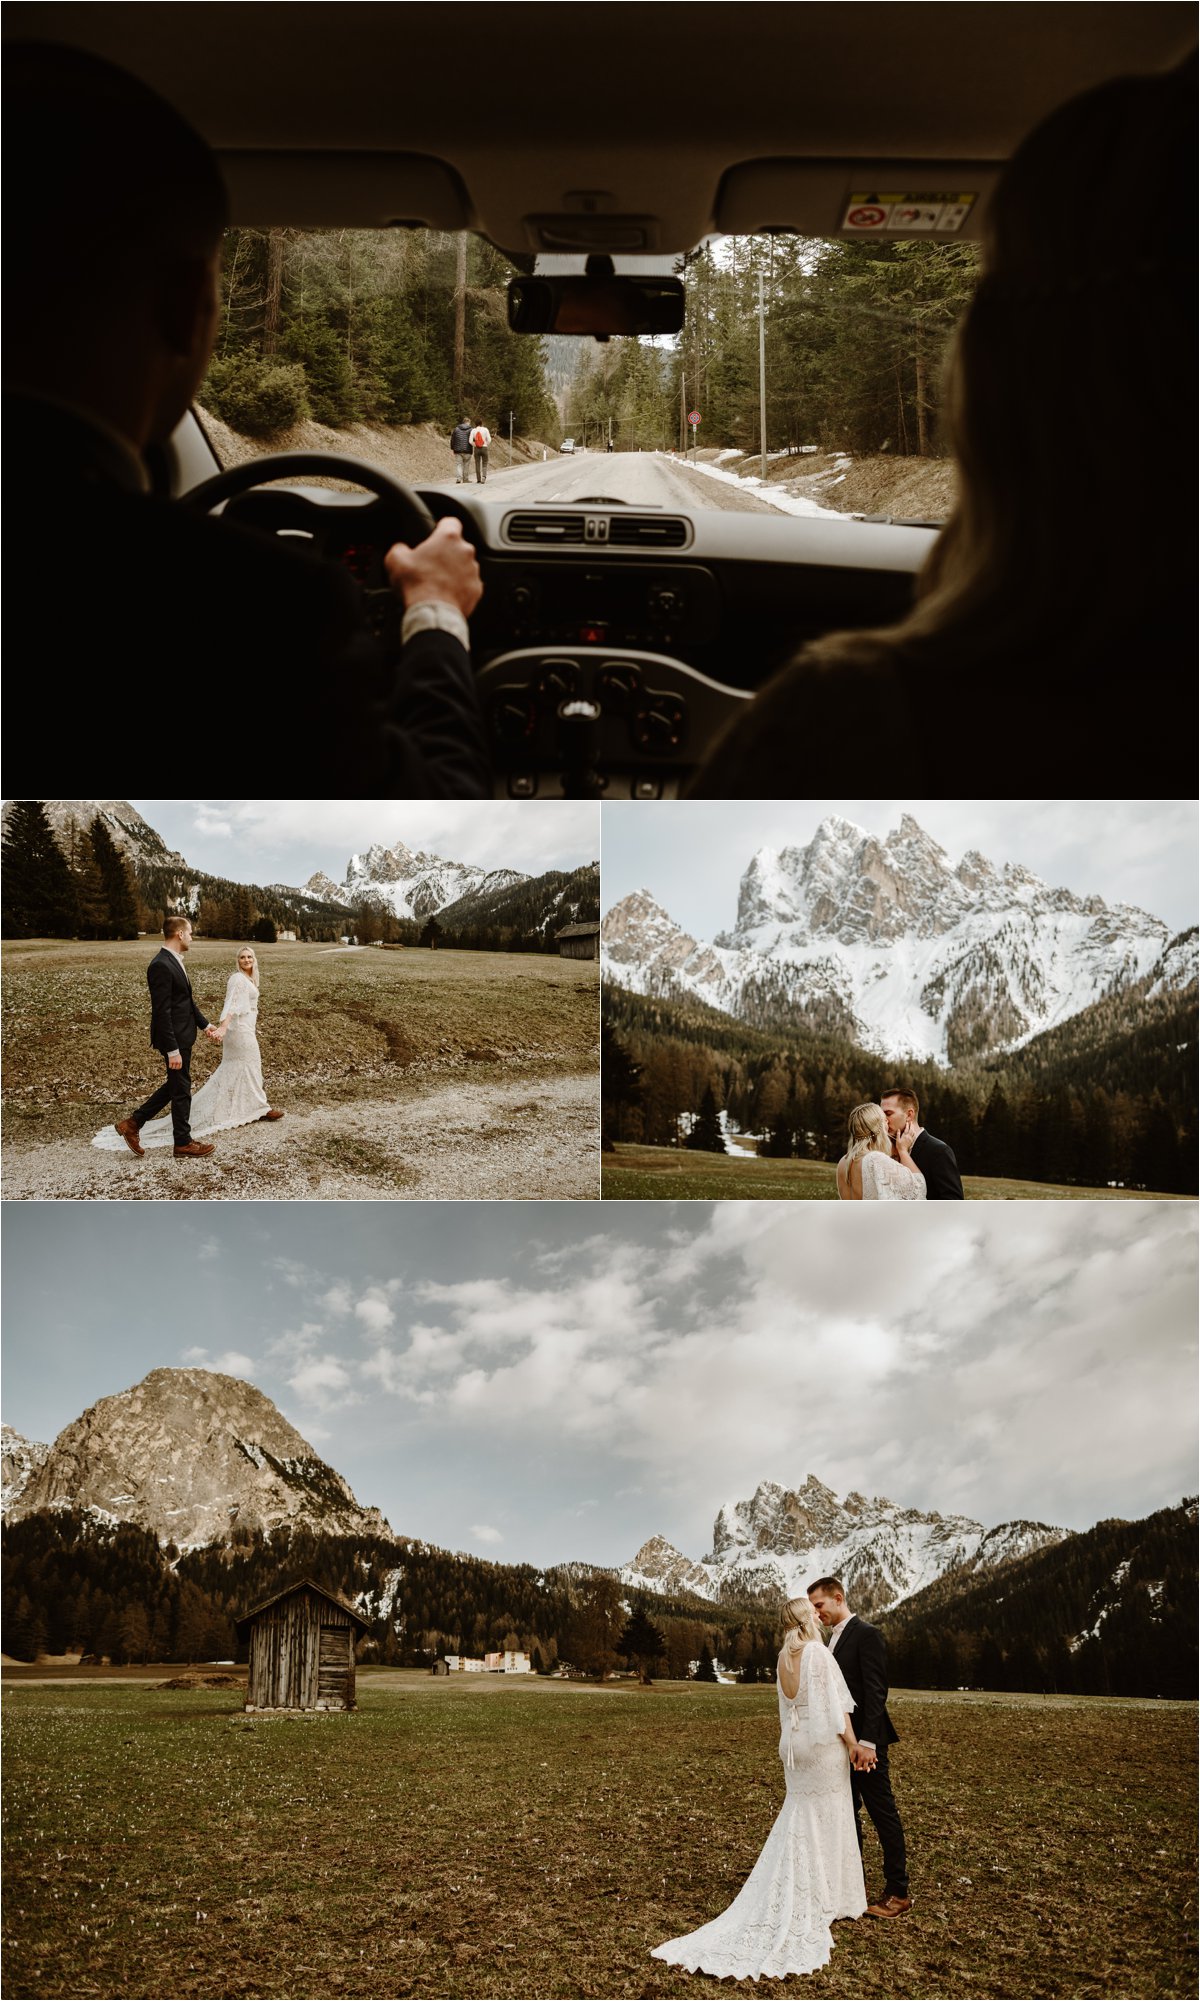 Erika & Nathan explore the mountain meadows of the Italian Dolomites. Photos by Wild Connections Photography - Alps & Dolomites Elopement Photographer